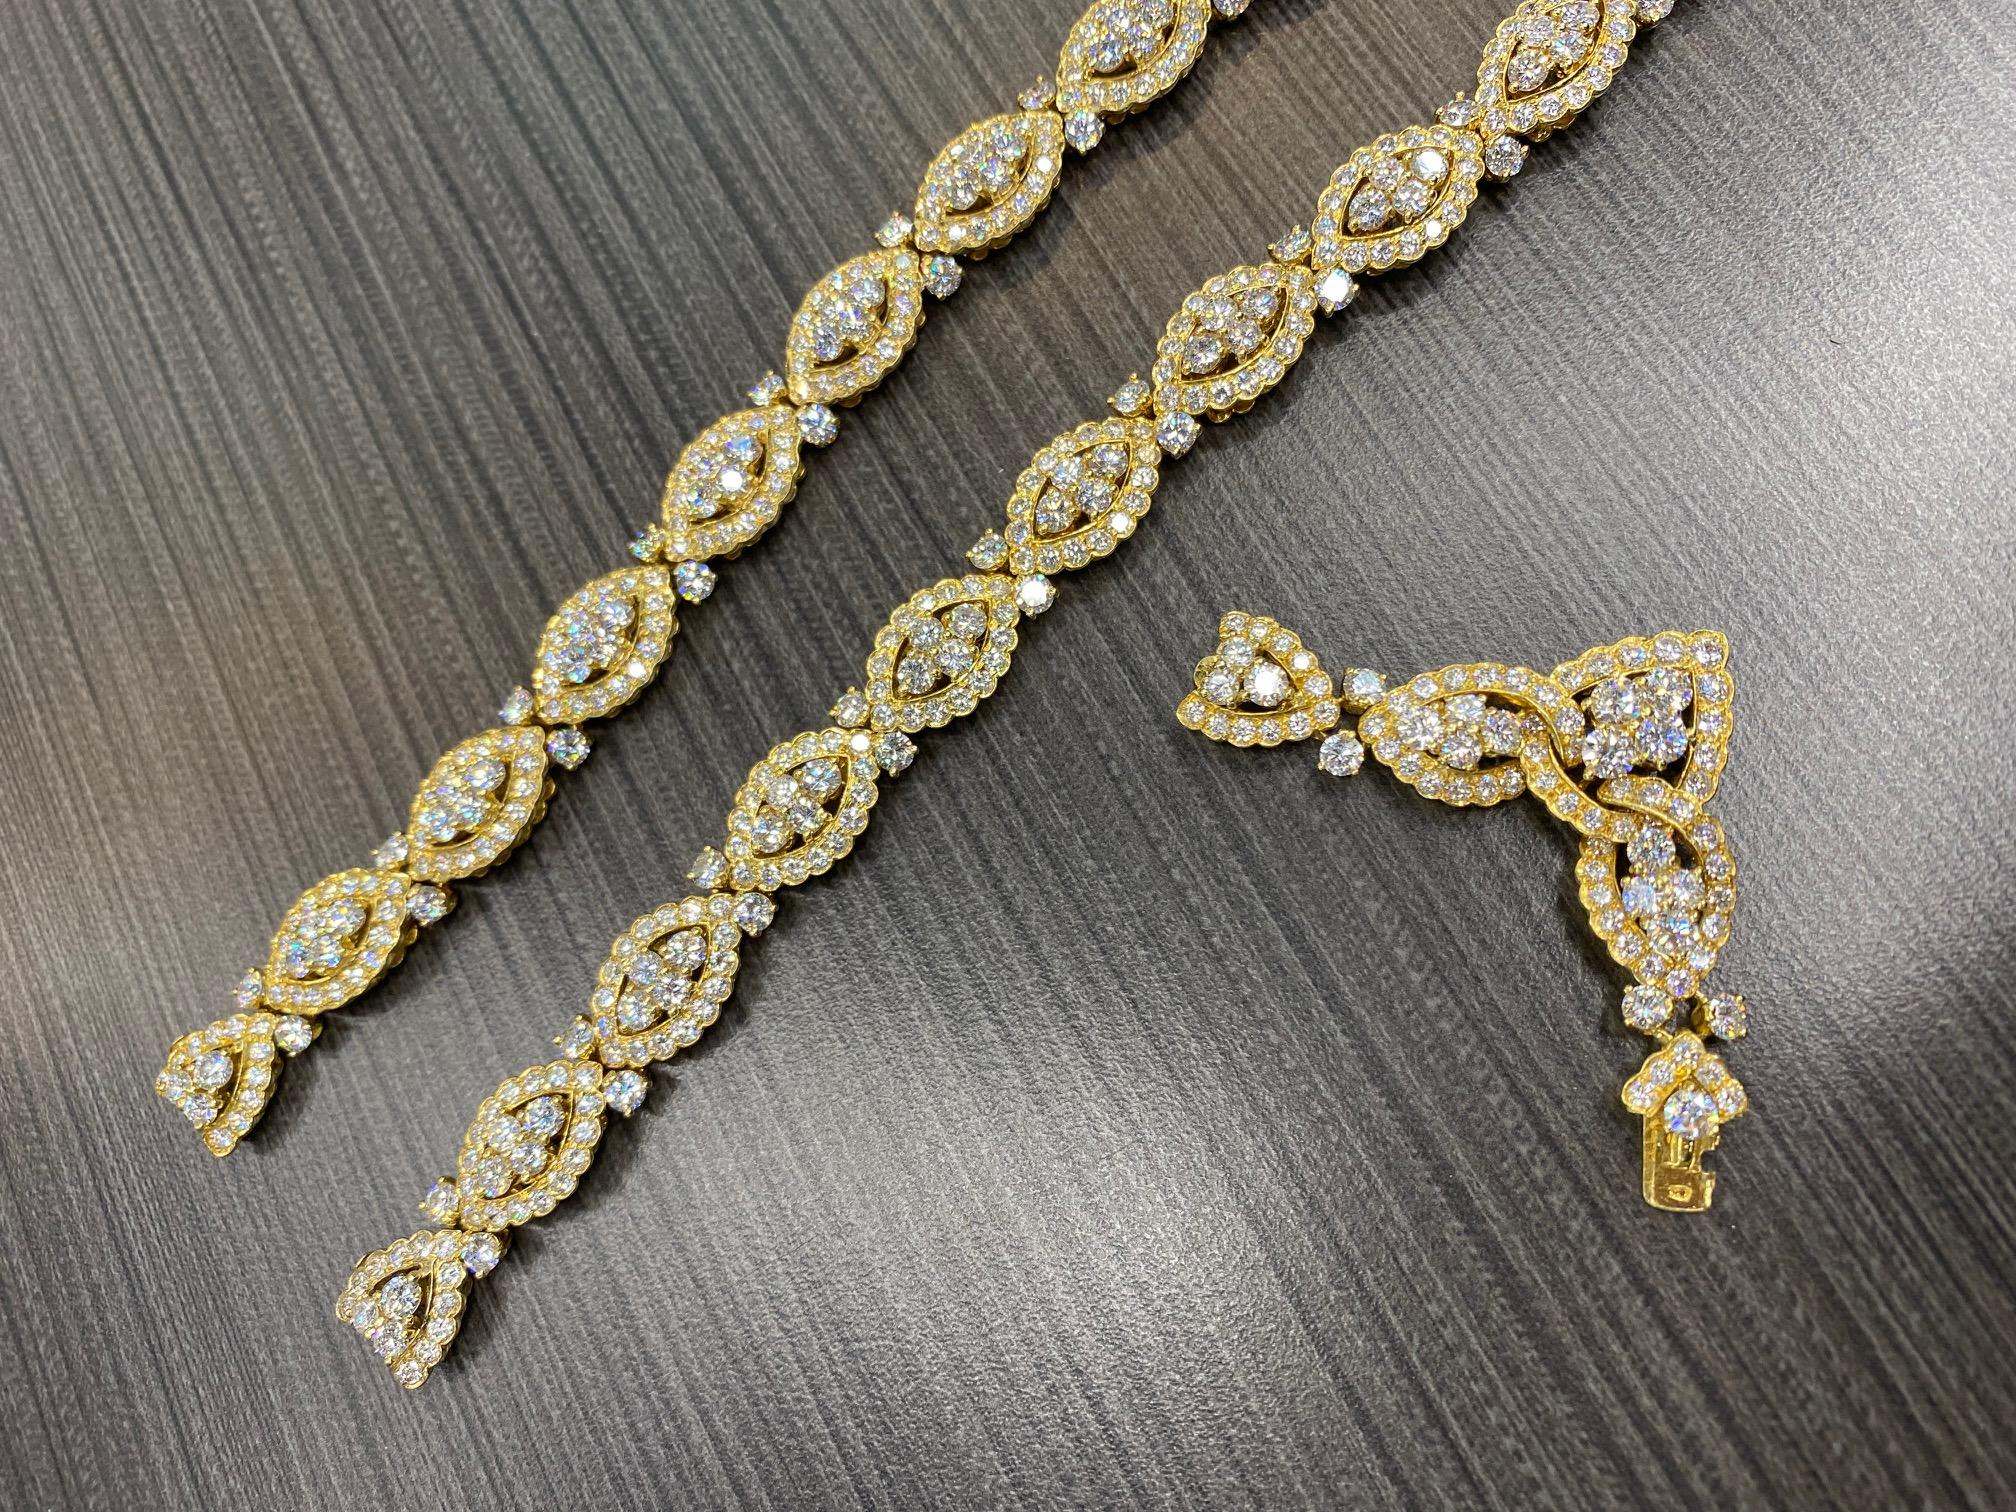 Van Cleef & Arpels 18K Yellow Gold 42.00cttw Diamond Necklace In Excellent Condition For Sale In New York, NY